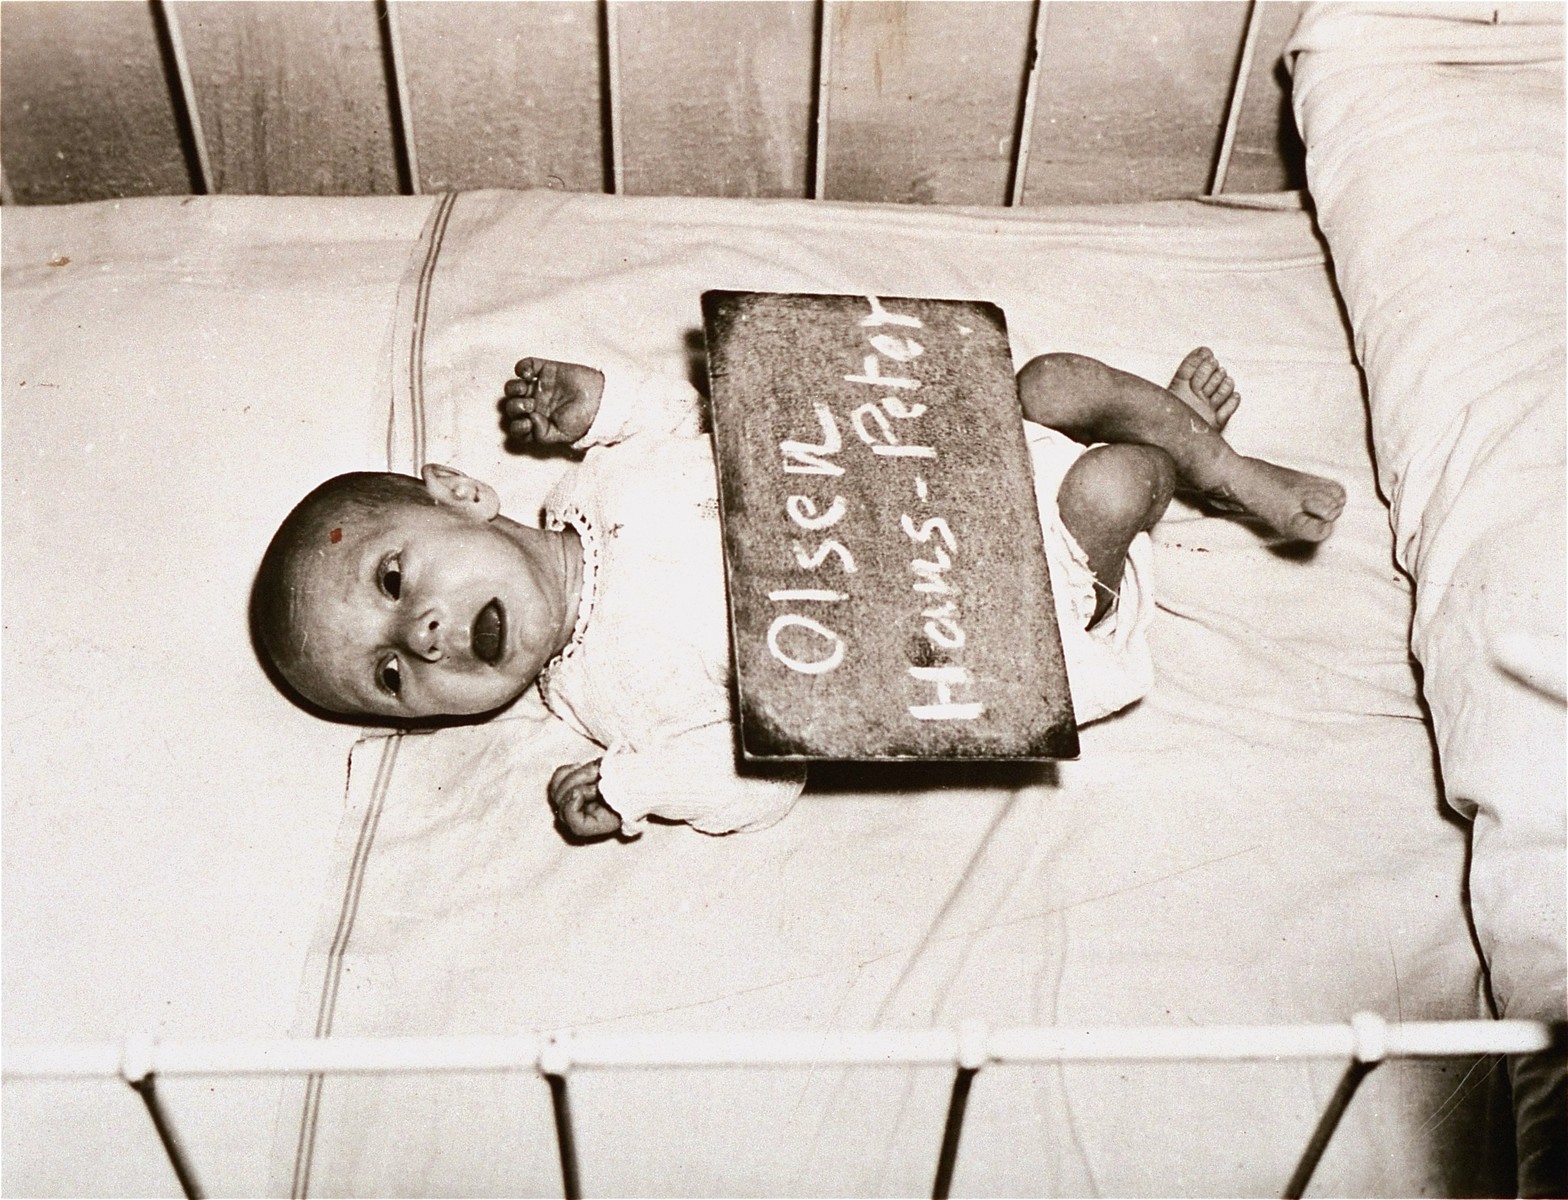 Infant Hans-Peter Olsen with a name card intended to help any of his surviving family members locate him at the Kloster Indersdorf DP camp.  This photograph was published in newspapers to facilitate reuniting the family.